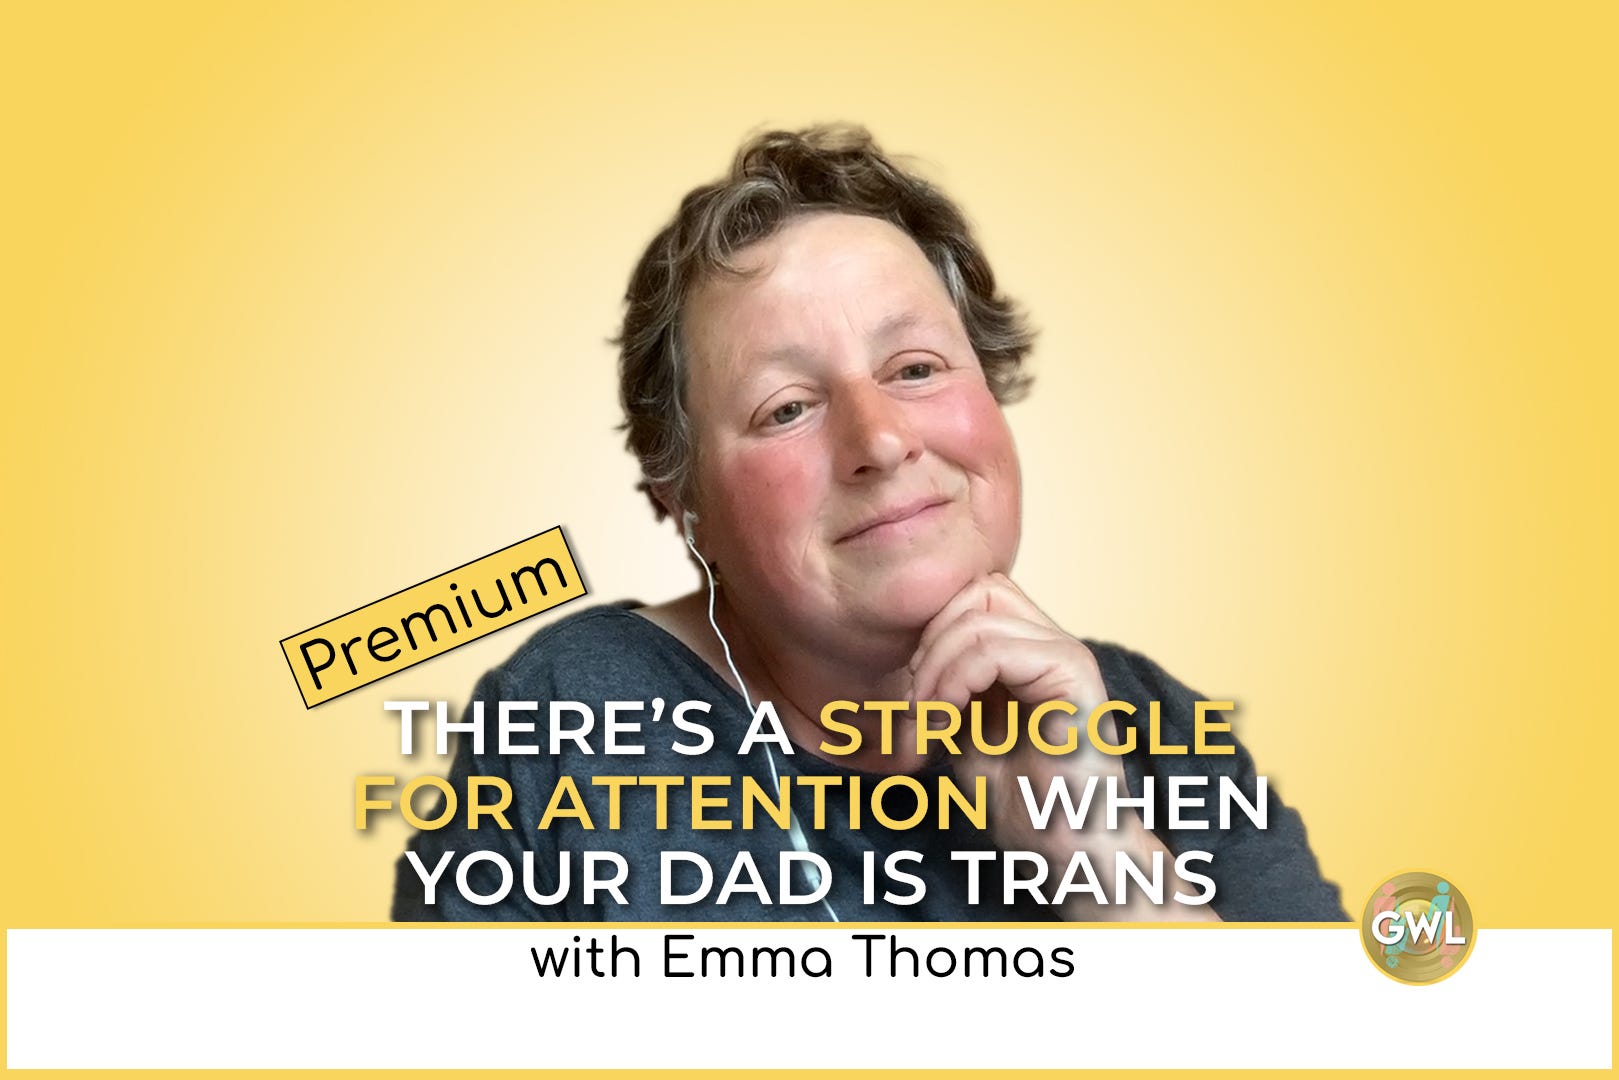 Premium: There's a Struggle for Attention When Your Dad is Trans